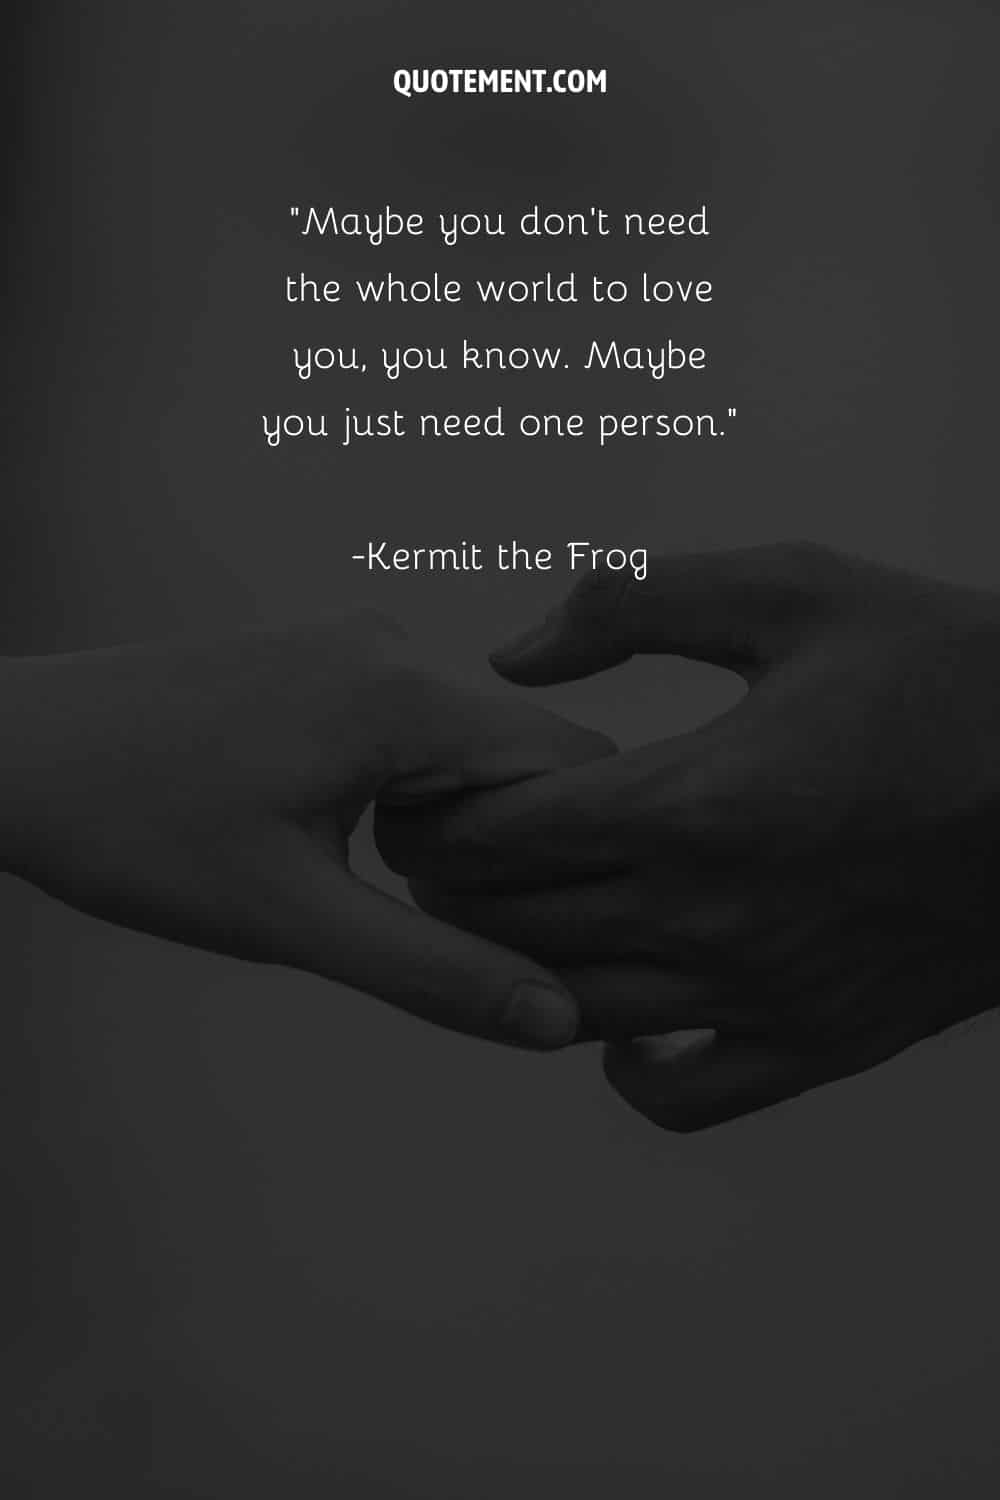 image of two holding hands representing a quote about love
